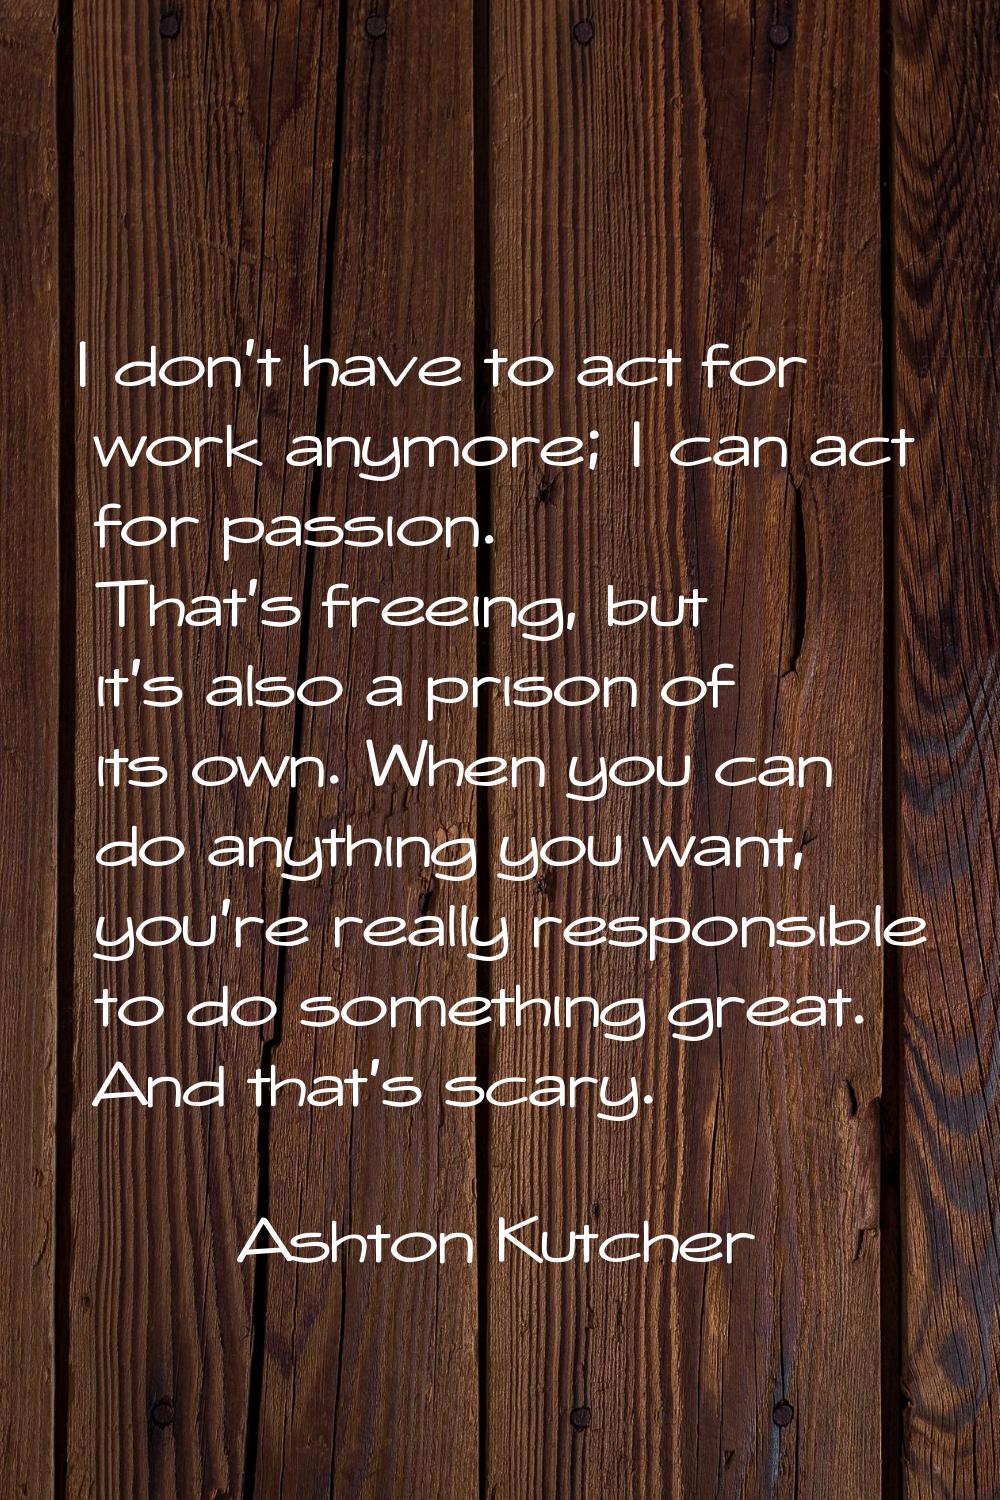 I don't have to act for work anymore; I can act for passion. That's freeing, but it's also a prison